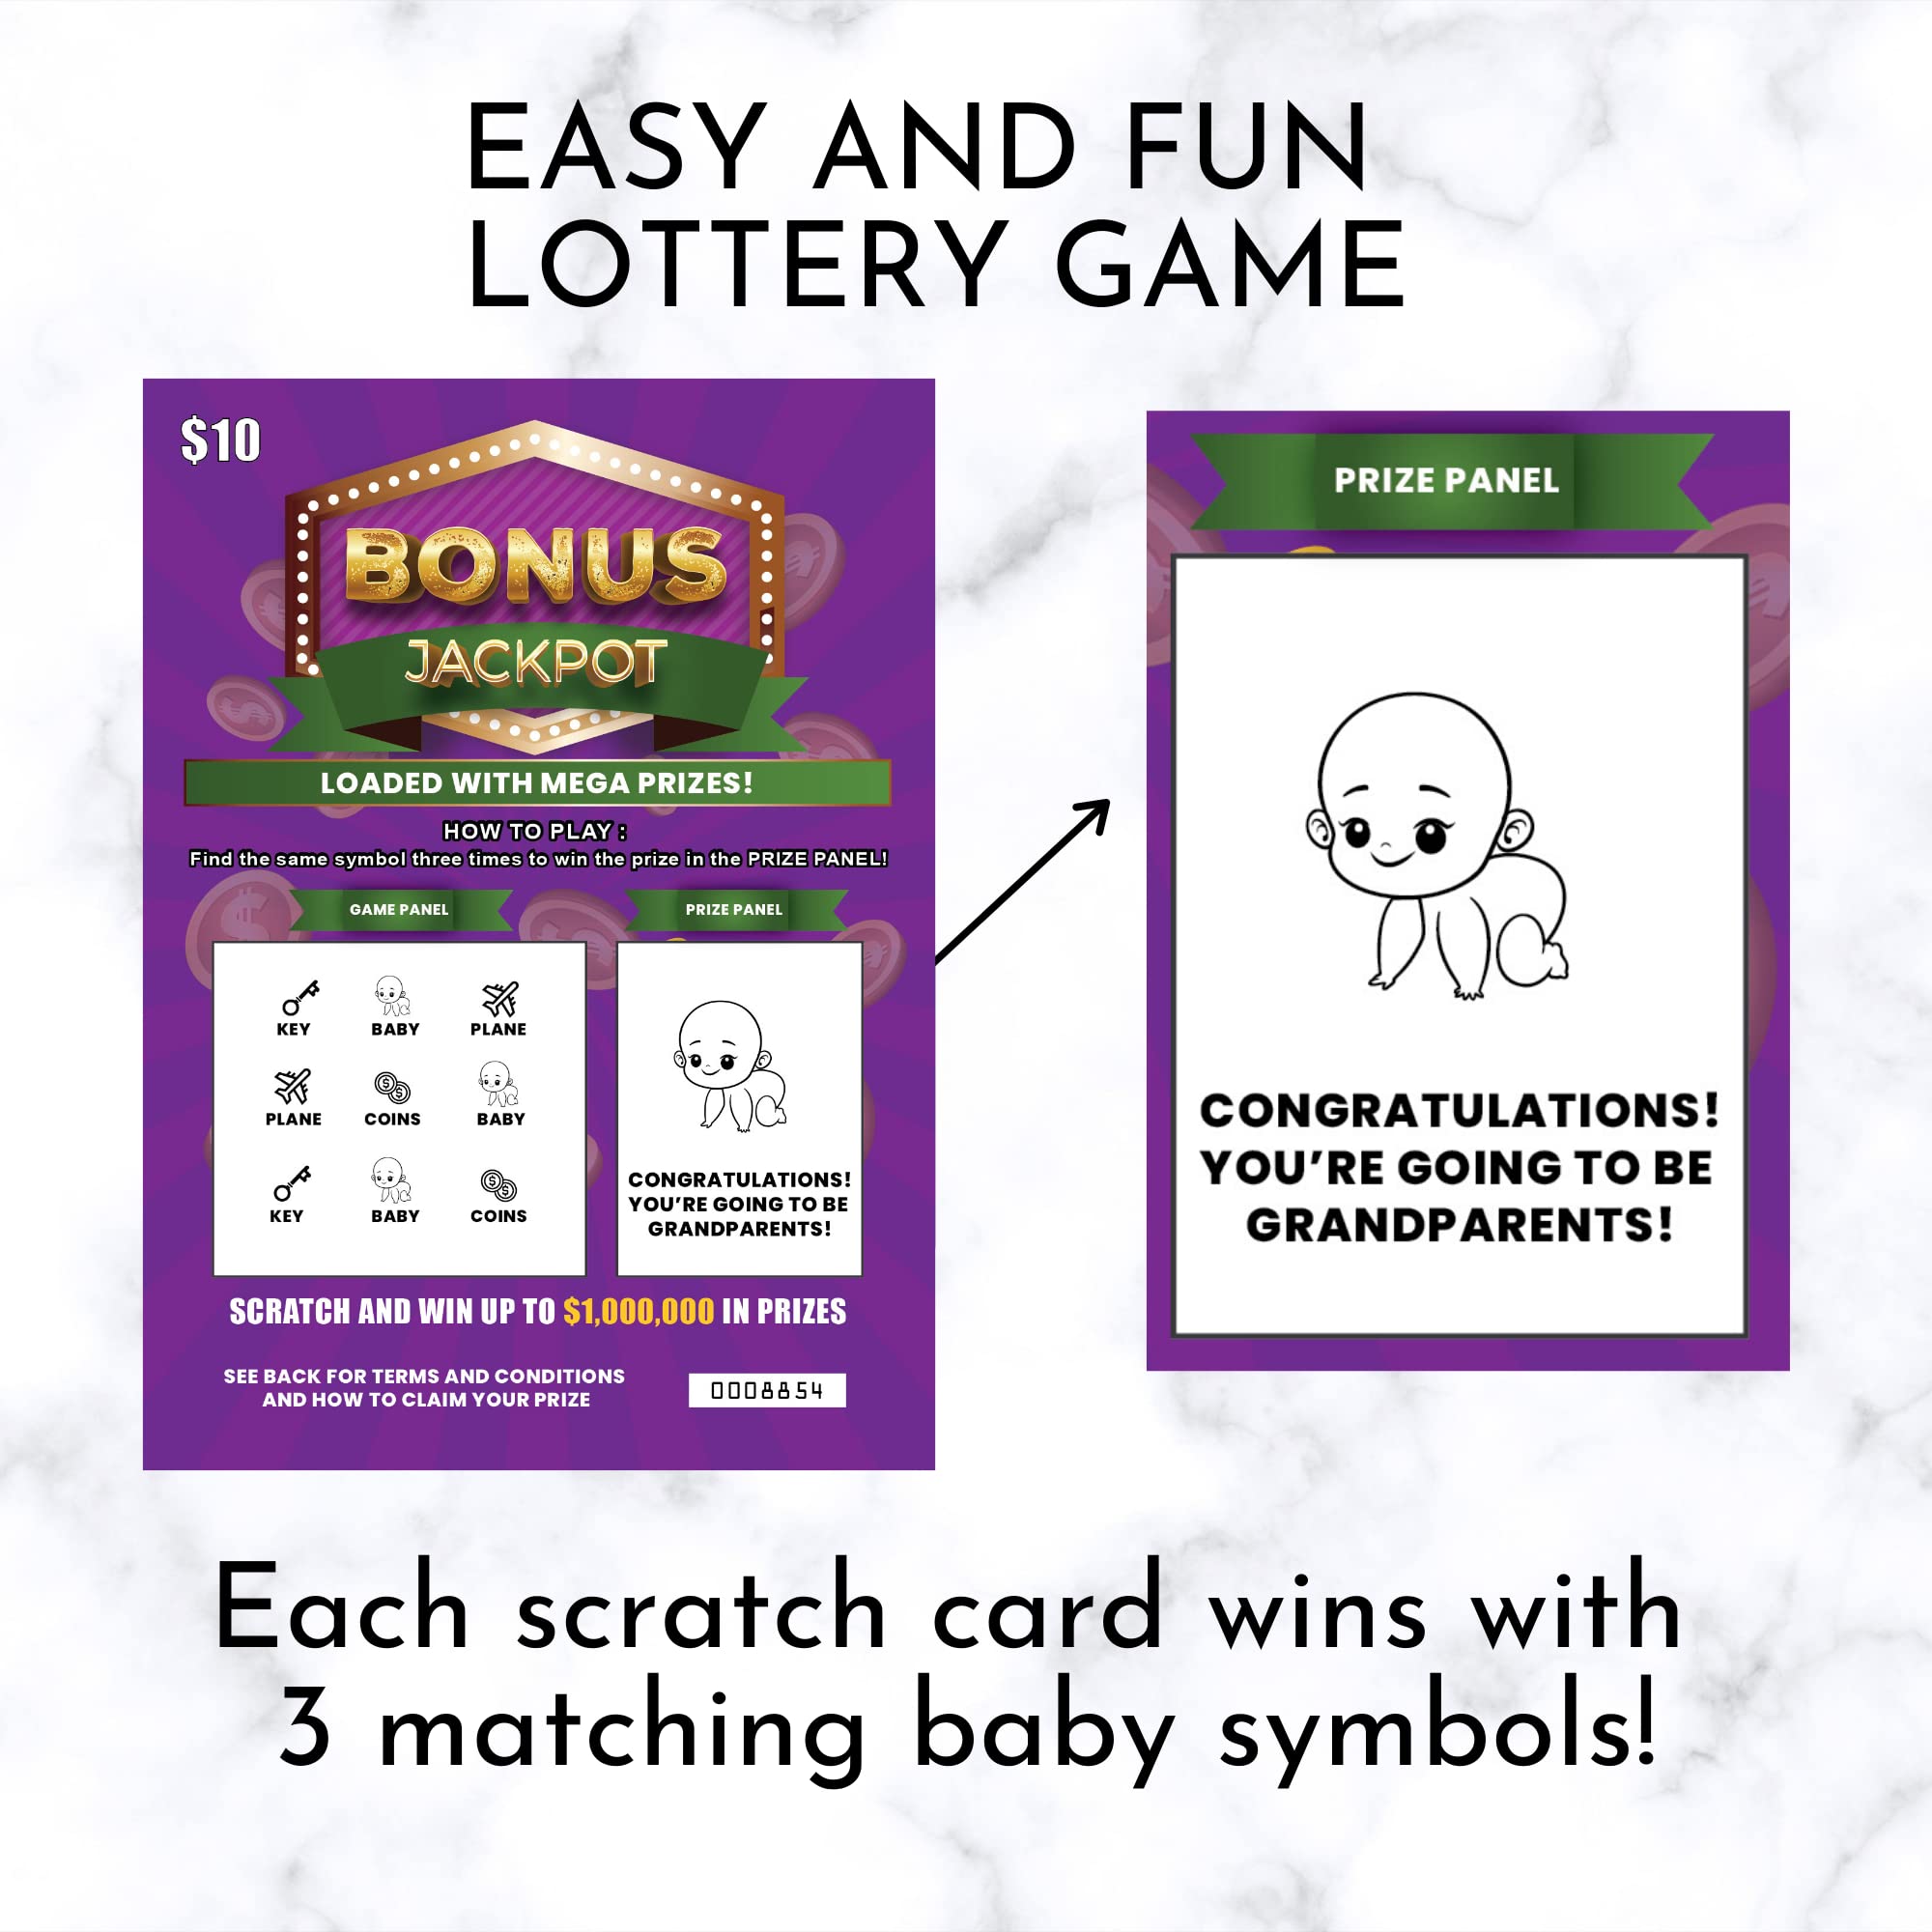 Zoschie 2 Pregnancy Announcement for Grandparents Lottery Ticket Scratch Off Cards - Grandparents Baby Announcement and Pregnancy Reveal Gift, Baby Surprise Scratchers for Grandma, Grandpa and Family